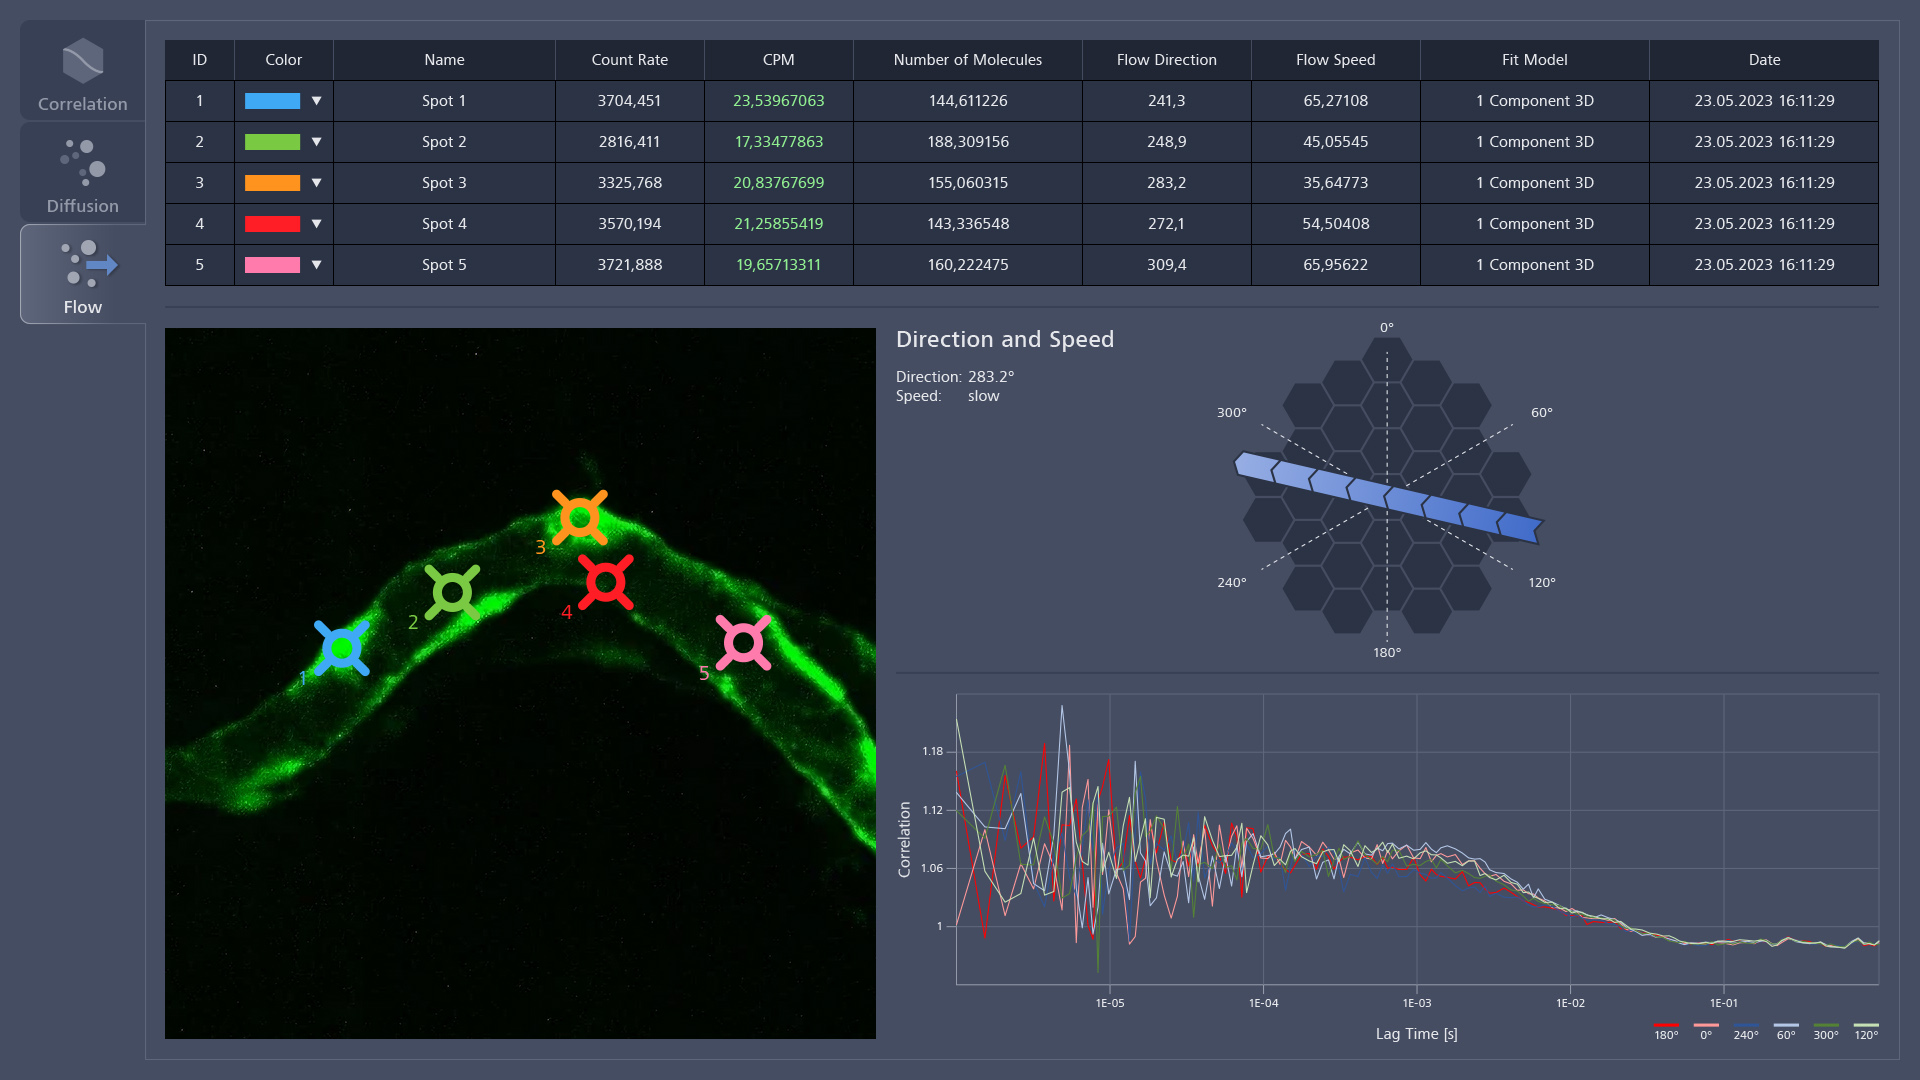 Flow measurement with ZEISS Dynamics Profiler: To determine the flow direction and speed within a liquid, 27 detector element pairs are cross-correlated along three different axes of the ZEISS Airyscan detector.